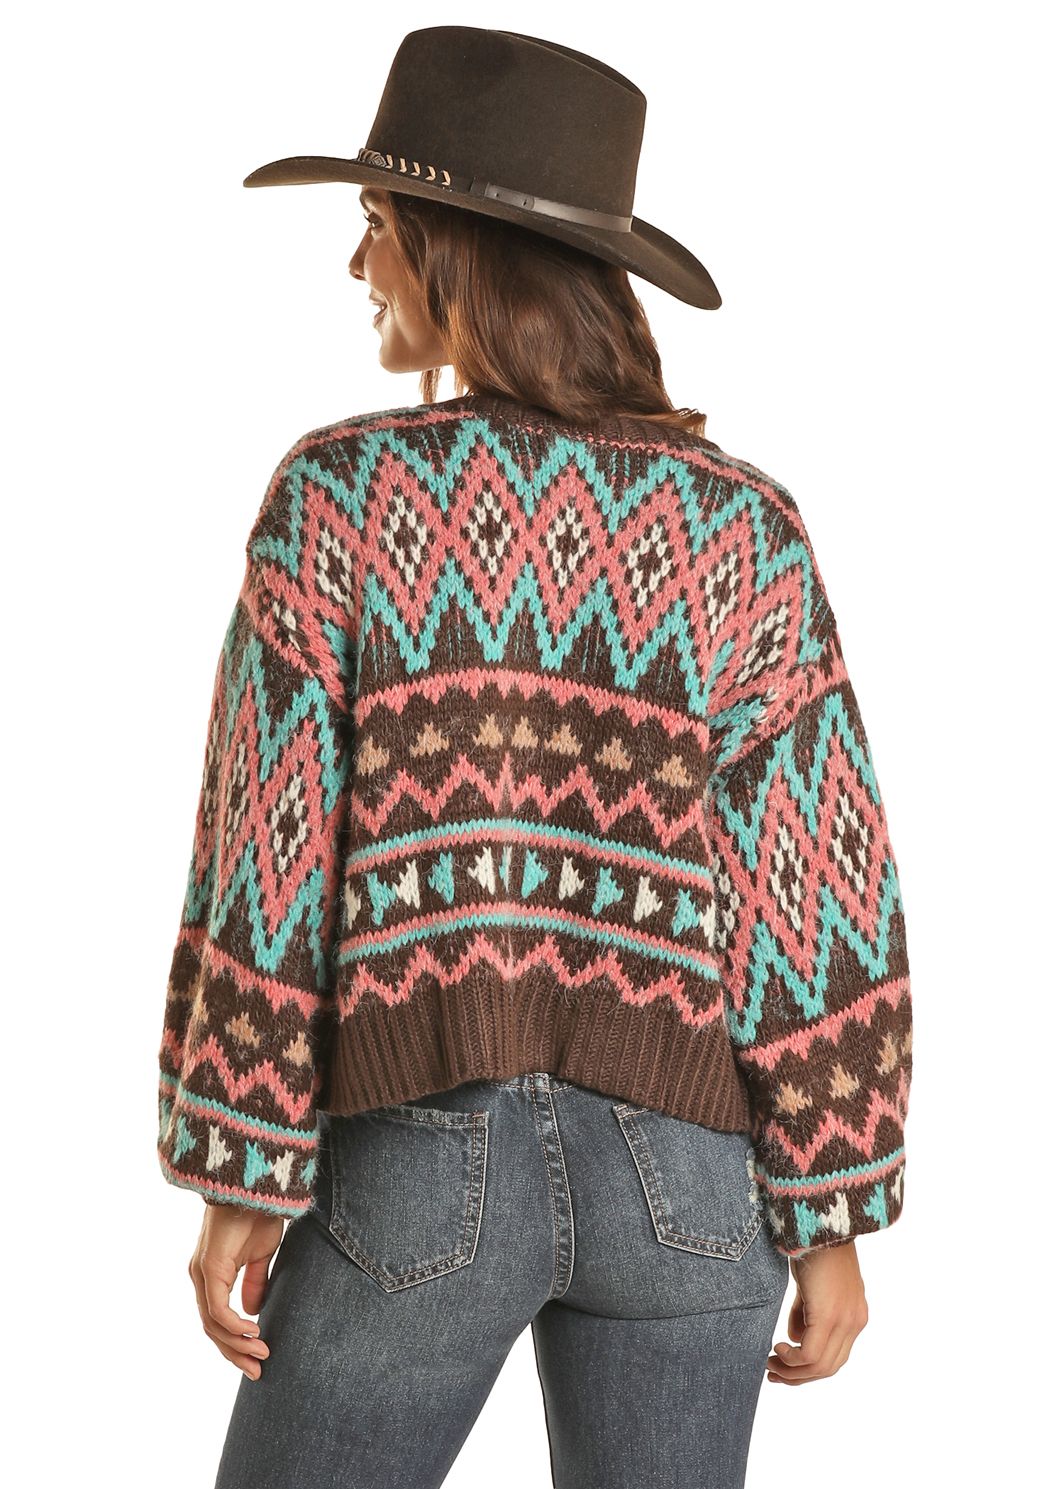 Rock and Roll Aztec Cardigan - (BW95T02023)